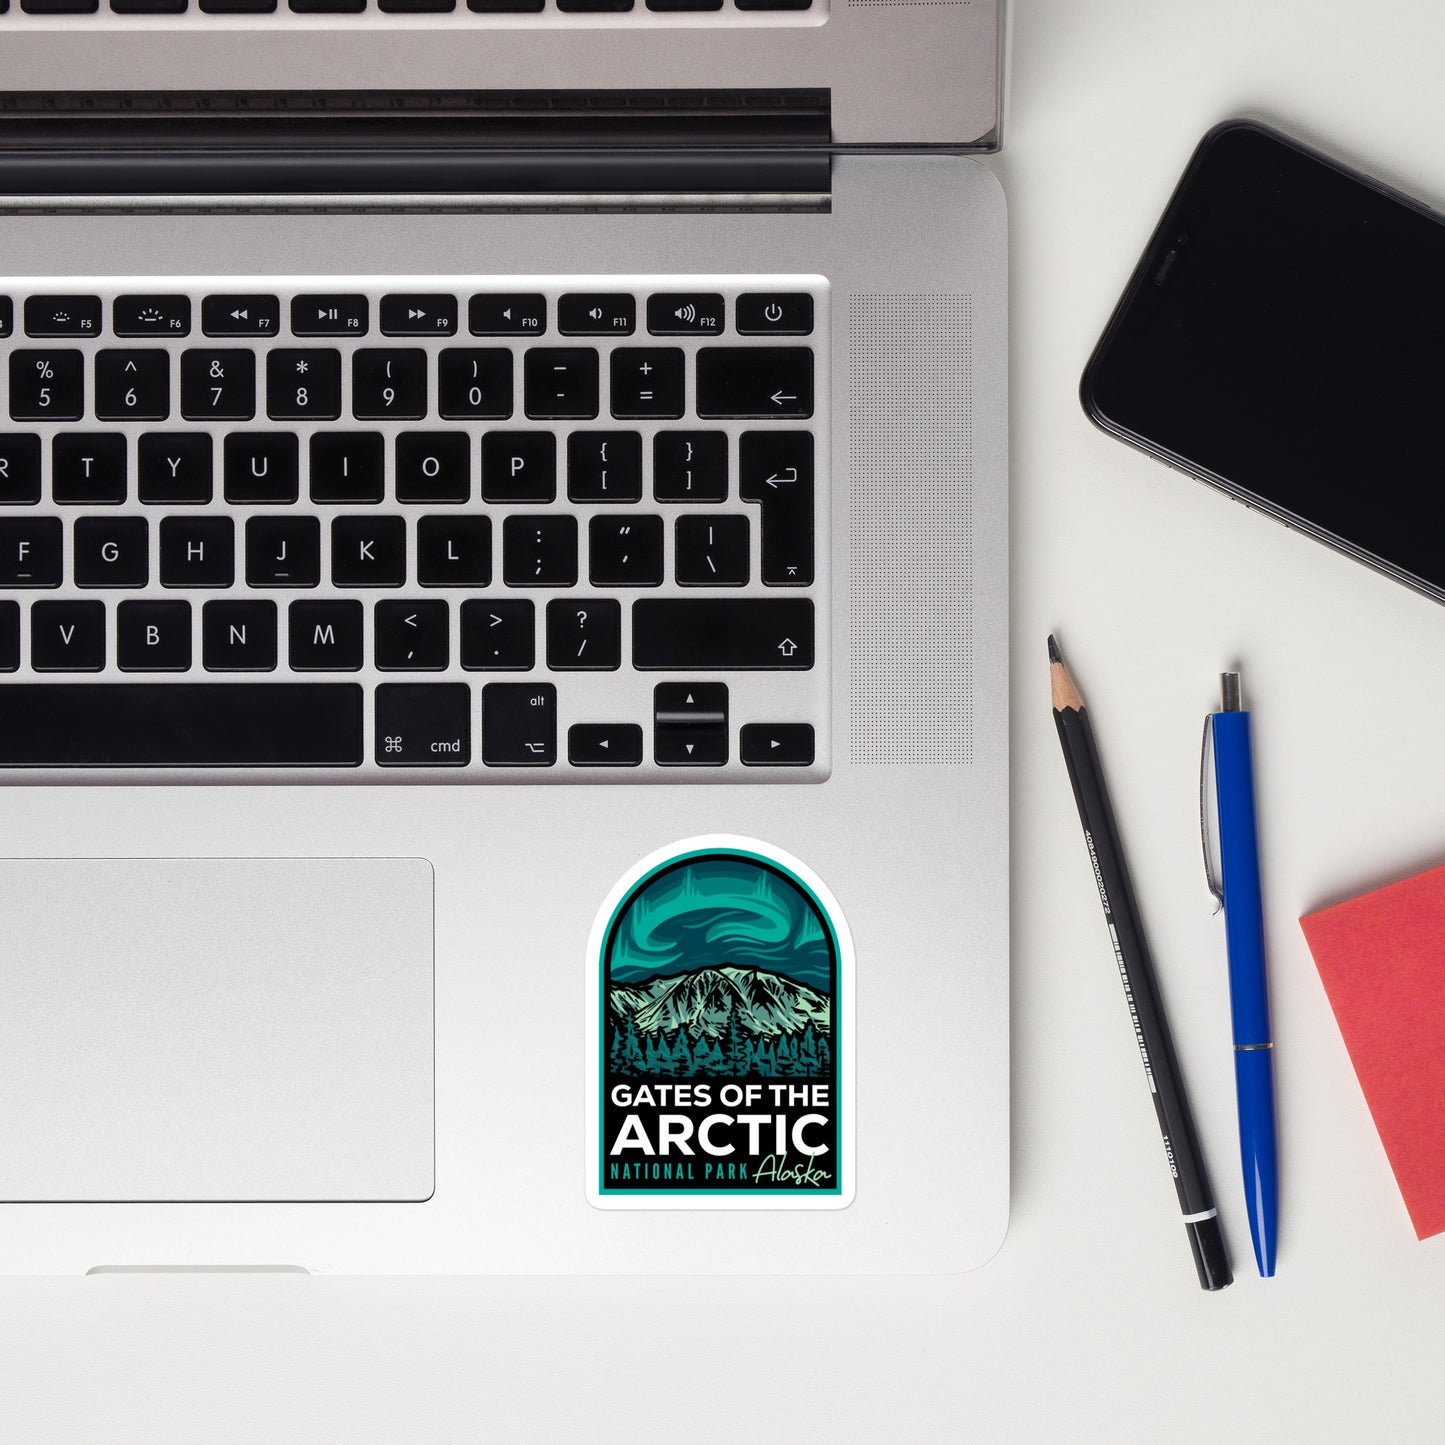 A sticker of Gates of the Arctic National Park on a laptop